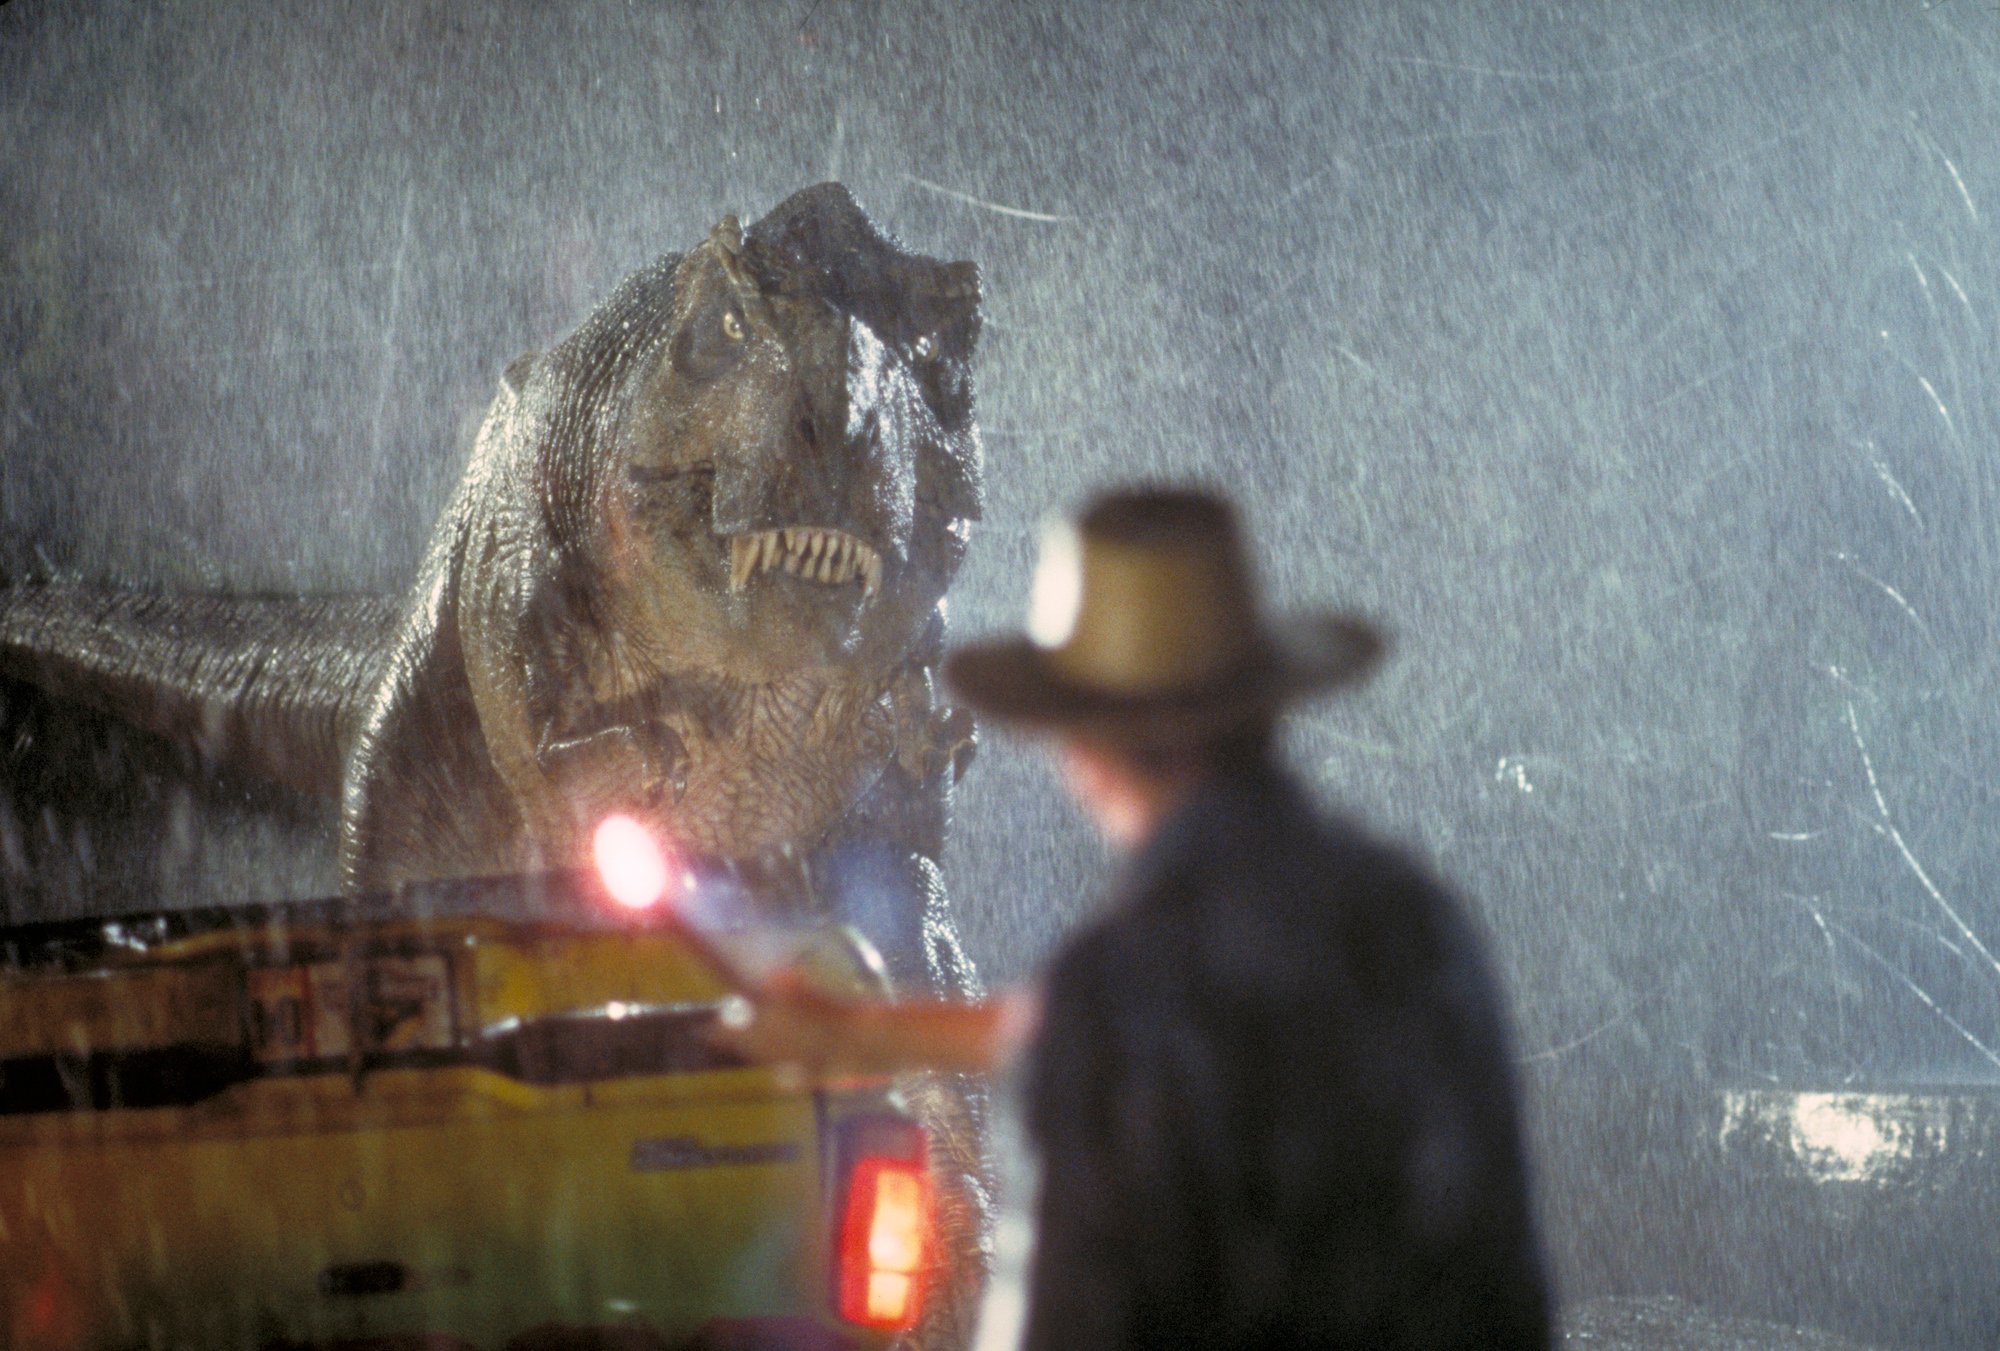 Actor Sam Neill as Dr. Alan Grant takes on a Tyrannosaurus Rex in a scene from the film 'Jurassic Park'